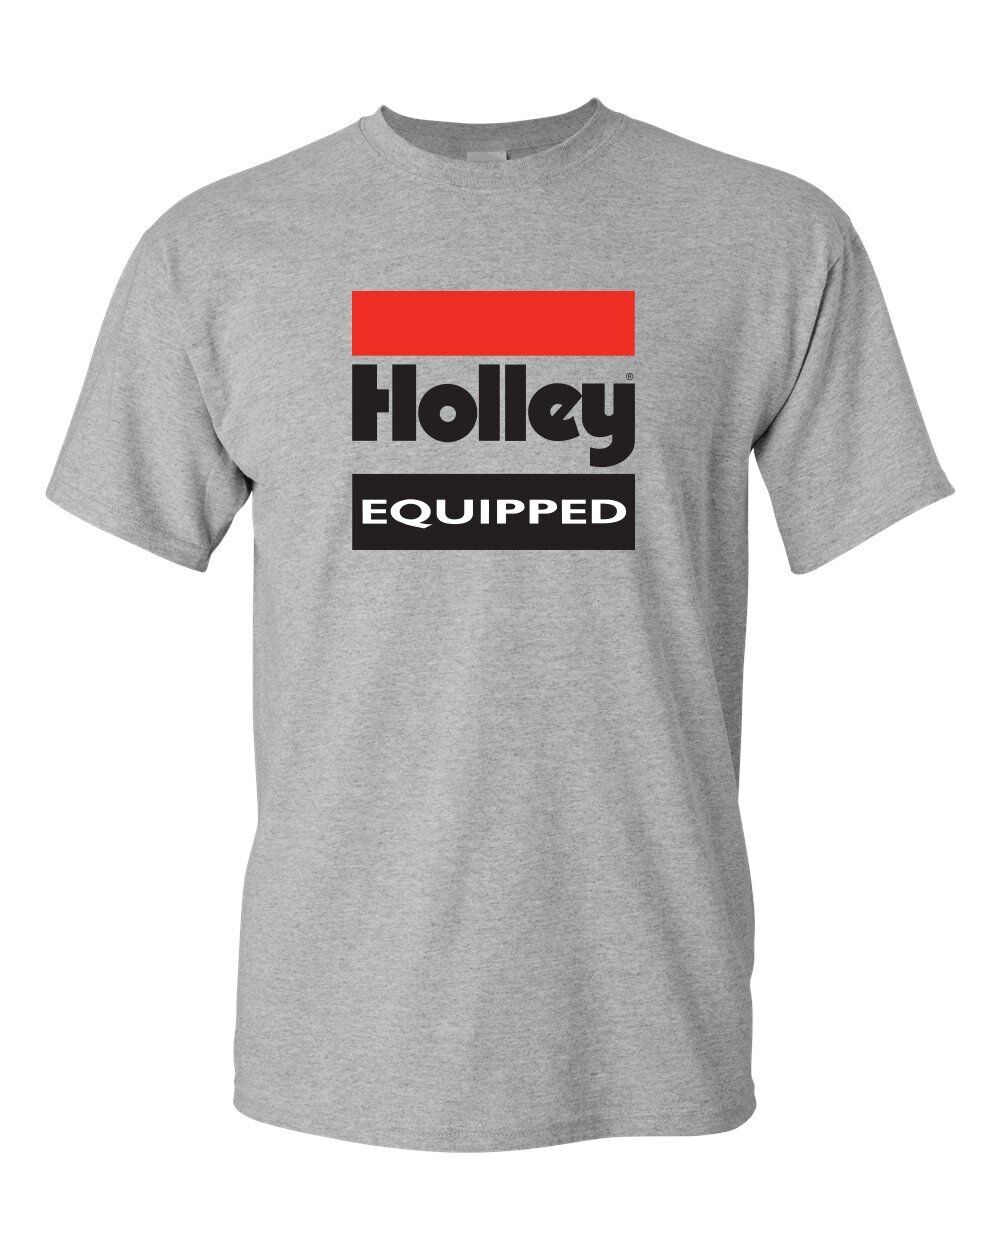 Holley 10022-5XHOL Holley Equipped T-Shirt